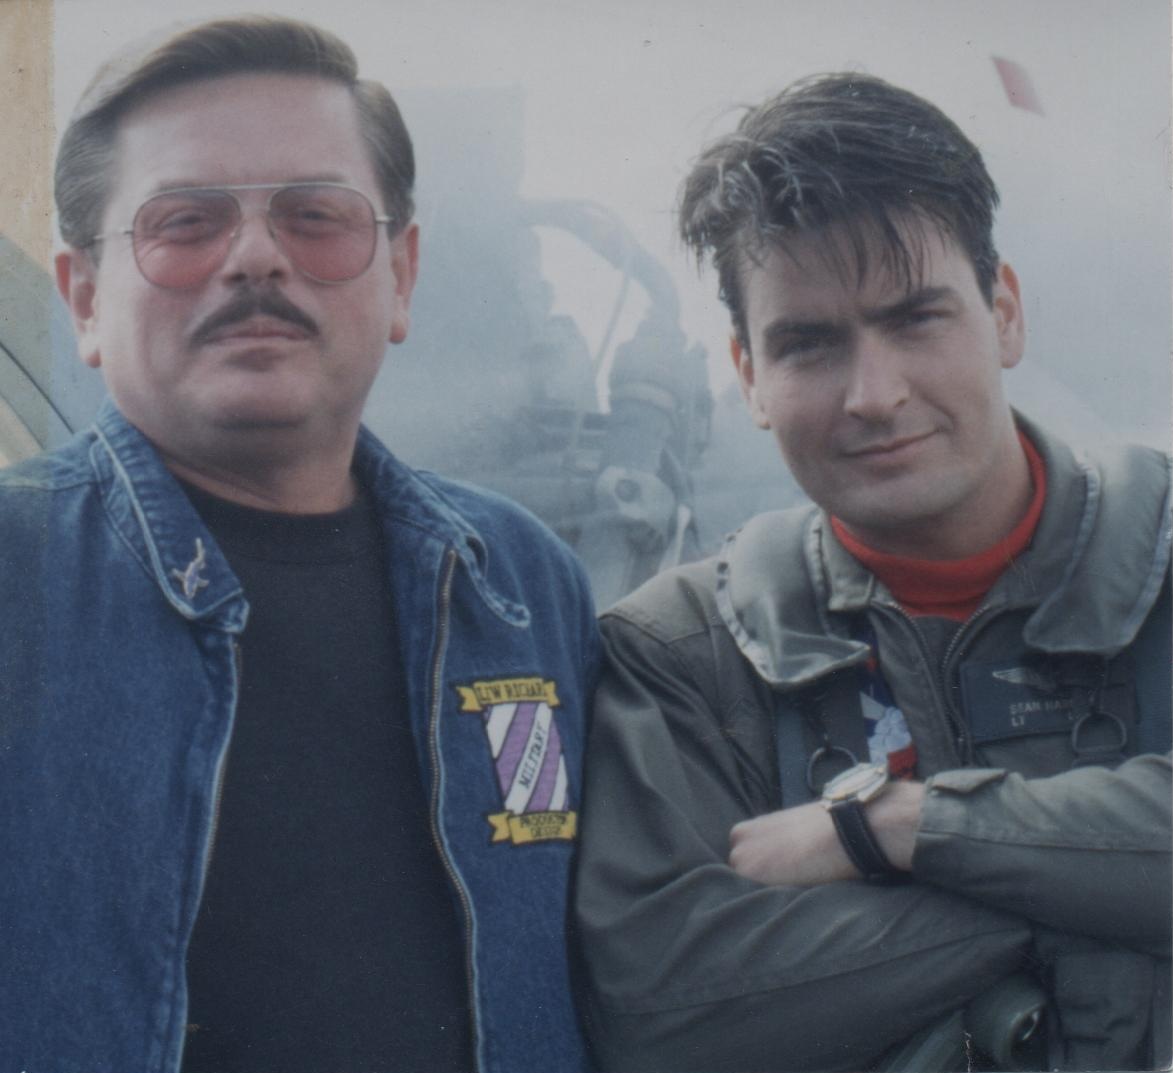 Lew Richard with Charlie Sheen on Hot Shots!